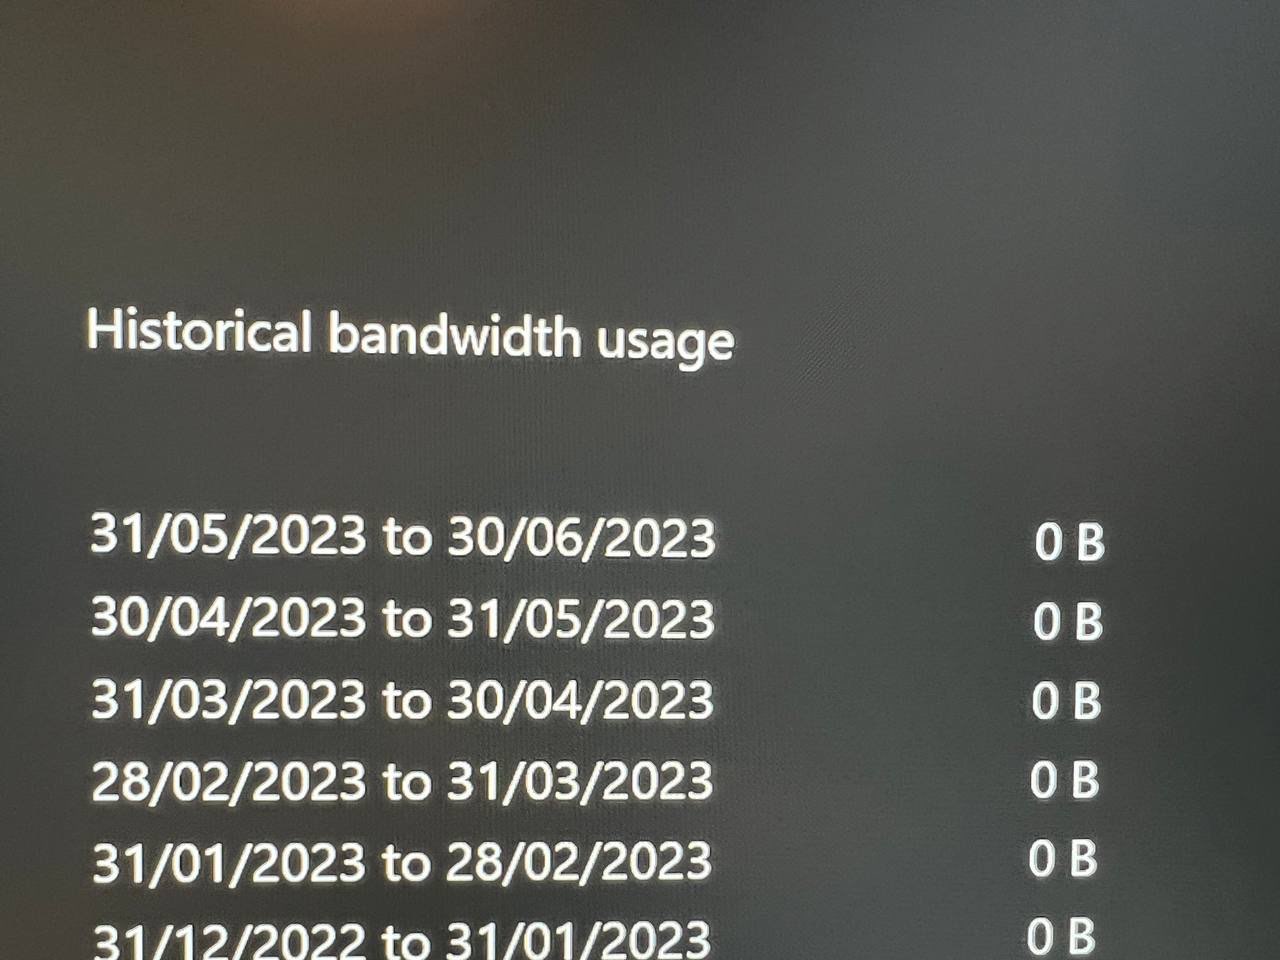 Xbox bandwidth usage shows 0B for all months since I bought it [​IMG]